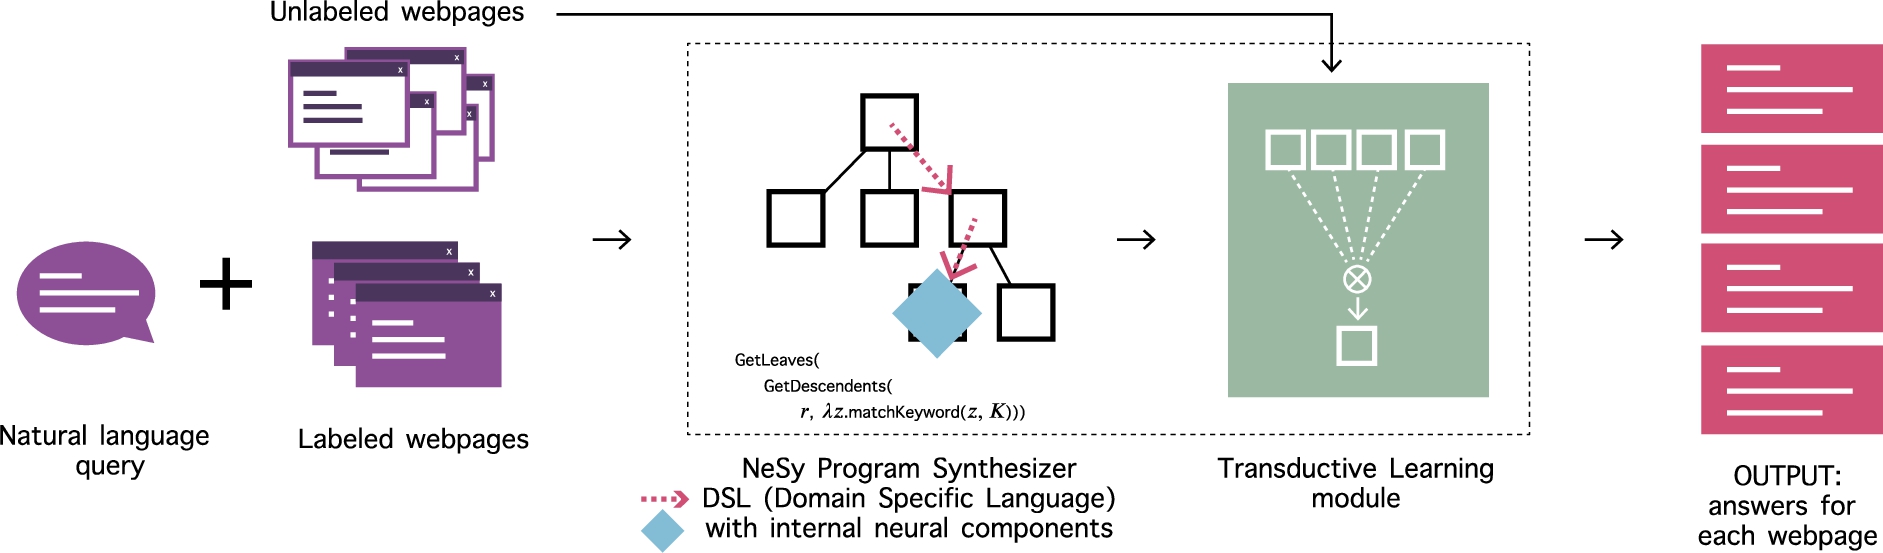 Type 2 nested. Given a natural language query and a set of web pages, the system outputs answers for each page. A symbolic reasoner, which uses a custom domain specific language (DSL) to traverse the HTML, interacts with internal neural modules such as BERT which perform a number of natural language processing tasks. What is learned is a DSL program, using only a few labeled examples, which can generalize to a large number of heterogeneous web pages. The authors report large improvements in precision and recall scores over state-of-the art, in some cases over 50 points [27].